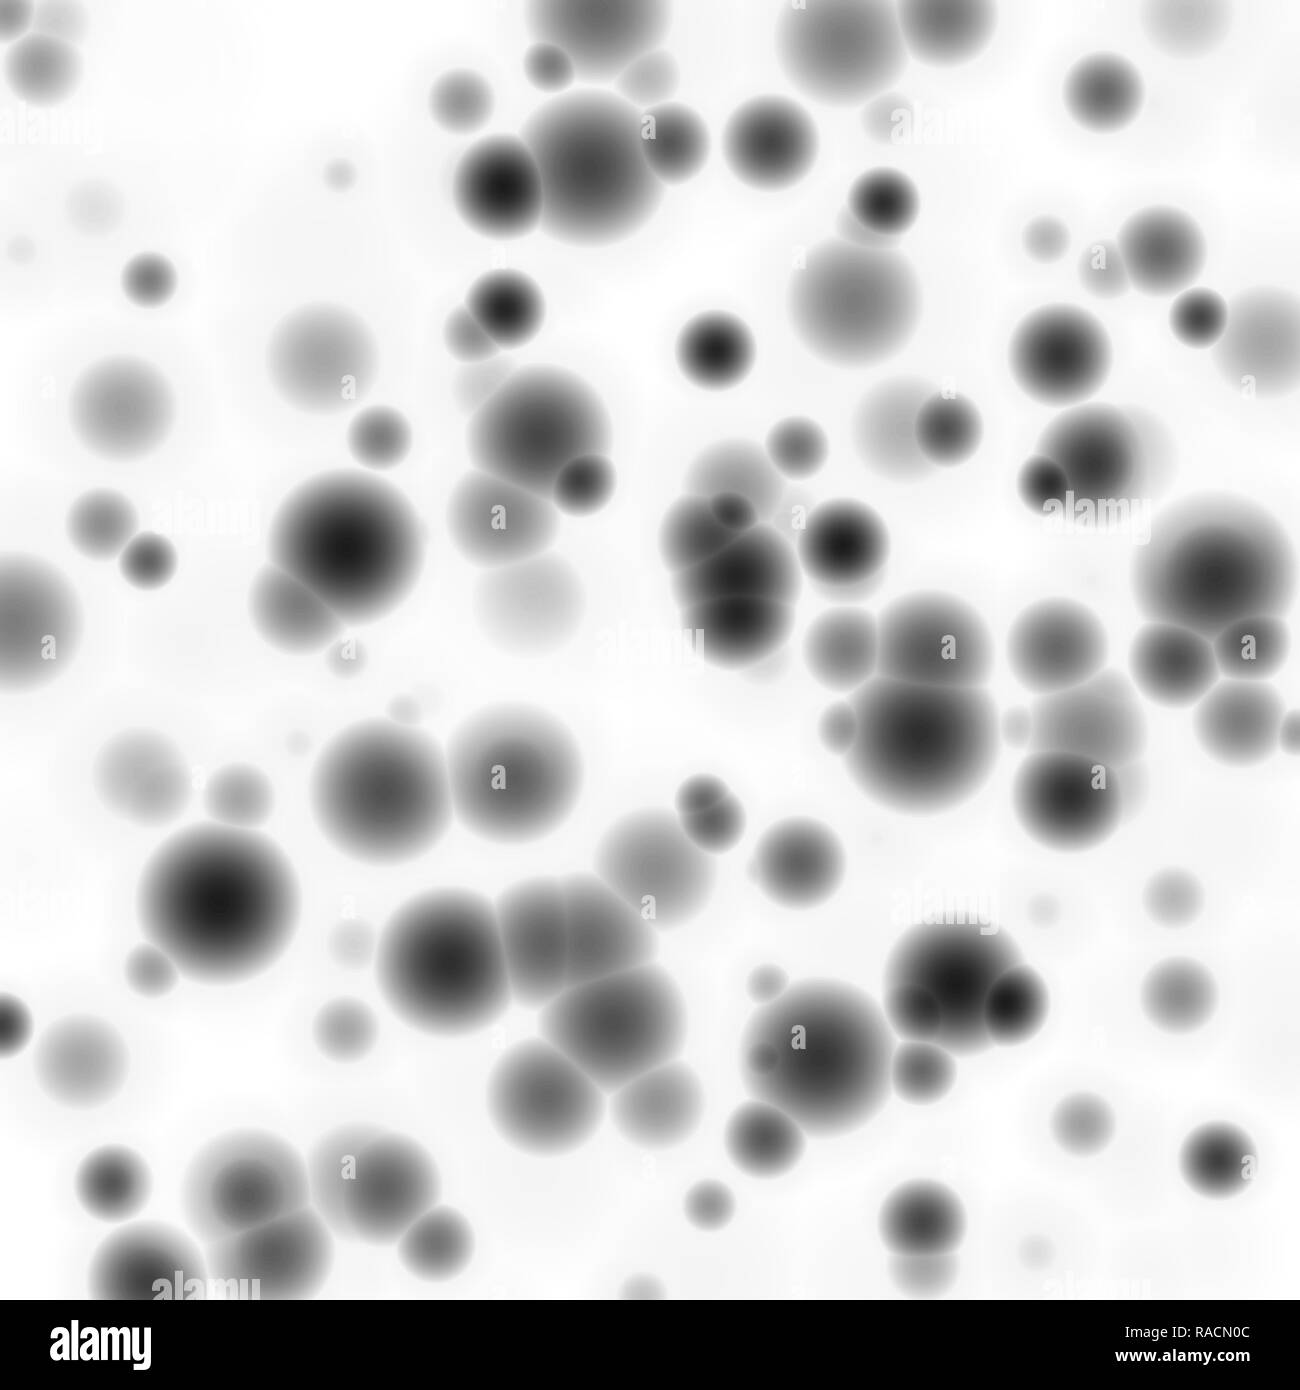 Abstract black bacteria on white background Stock Photo